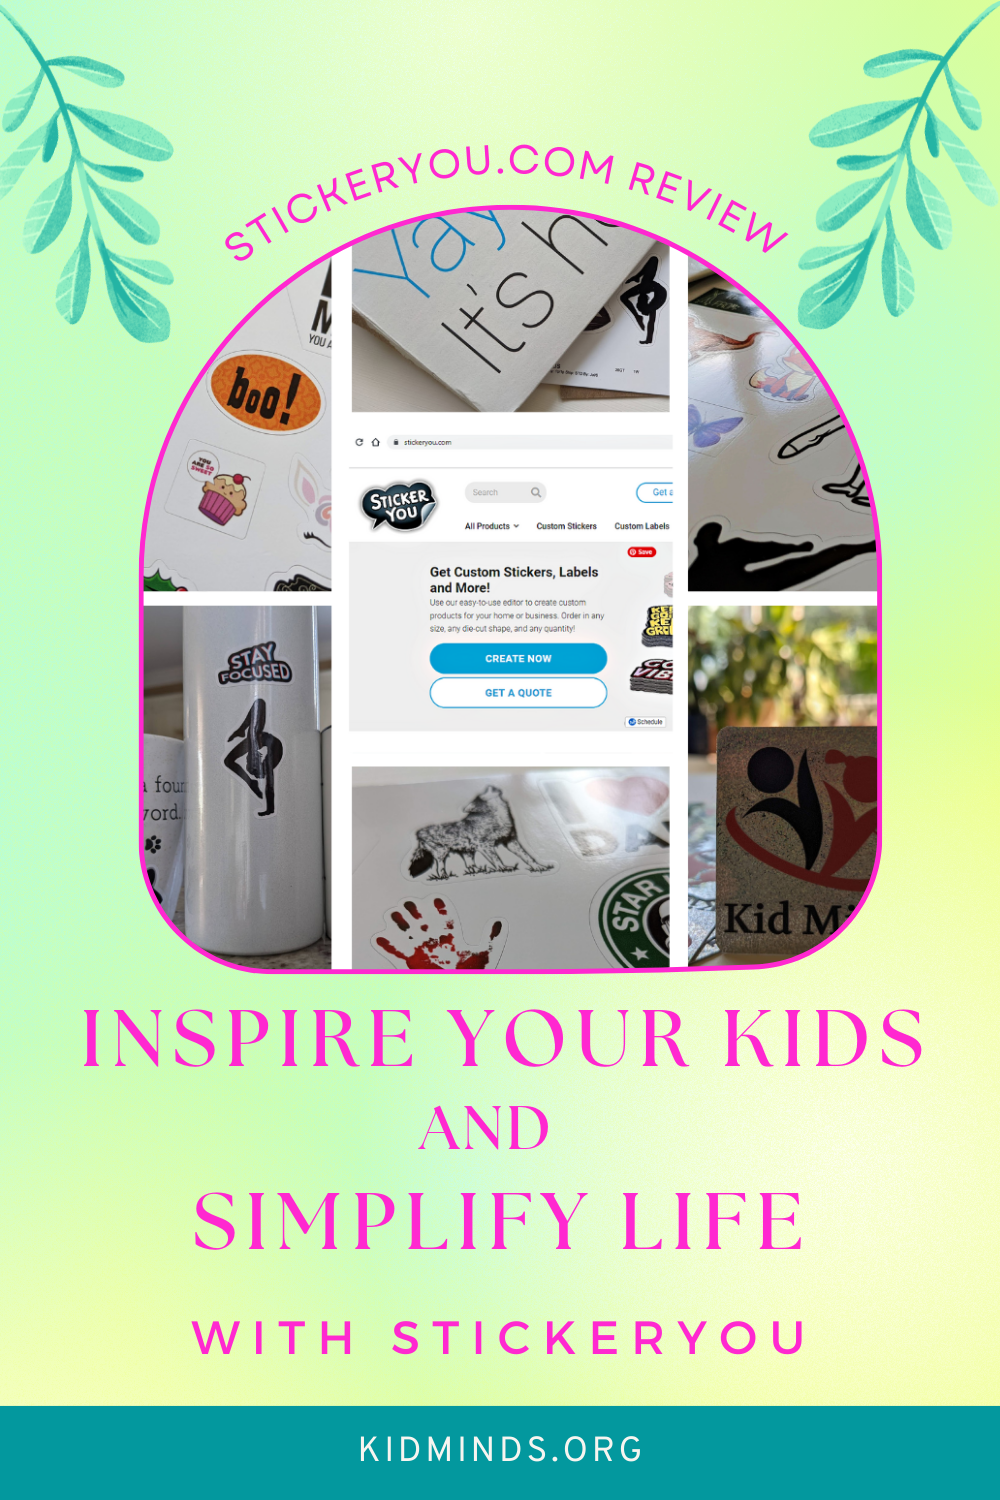 Stickers are such a delightful way to make learning more fun and life more interesting. Read my #review of StickerYou Inc. to find out how they could help you inspire kids and simplify life. #formoms #stickers #kidsactivities